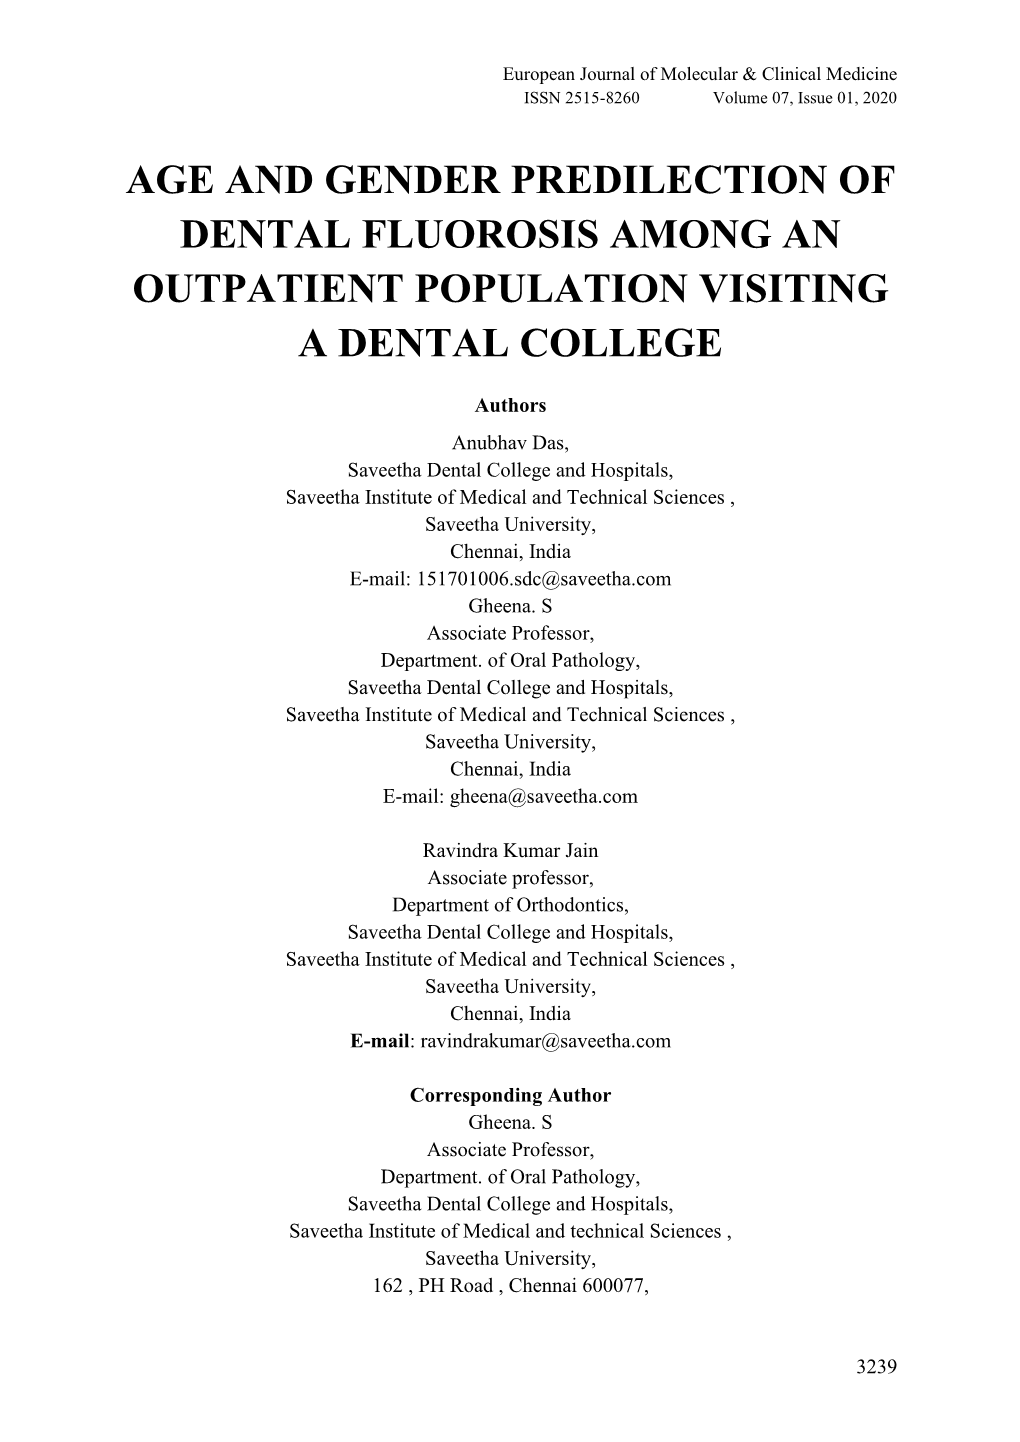 Age and Gender Predilection of Dental Fluorosis Among an Outpatient Population Visiting a Dental College